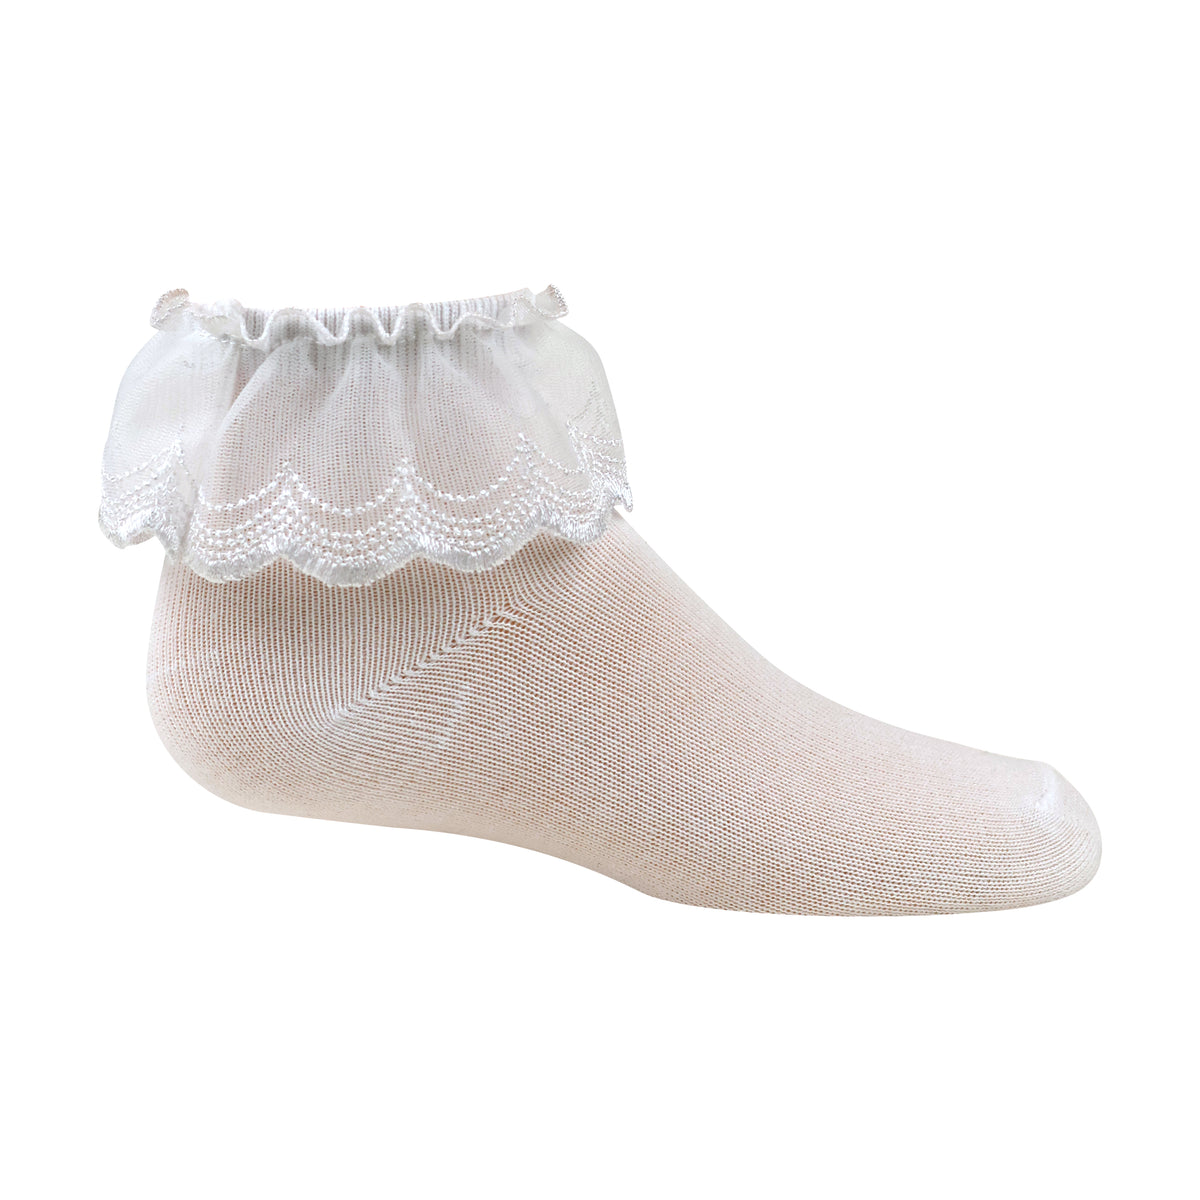 Scalloped Design Ruffle Ankle